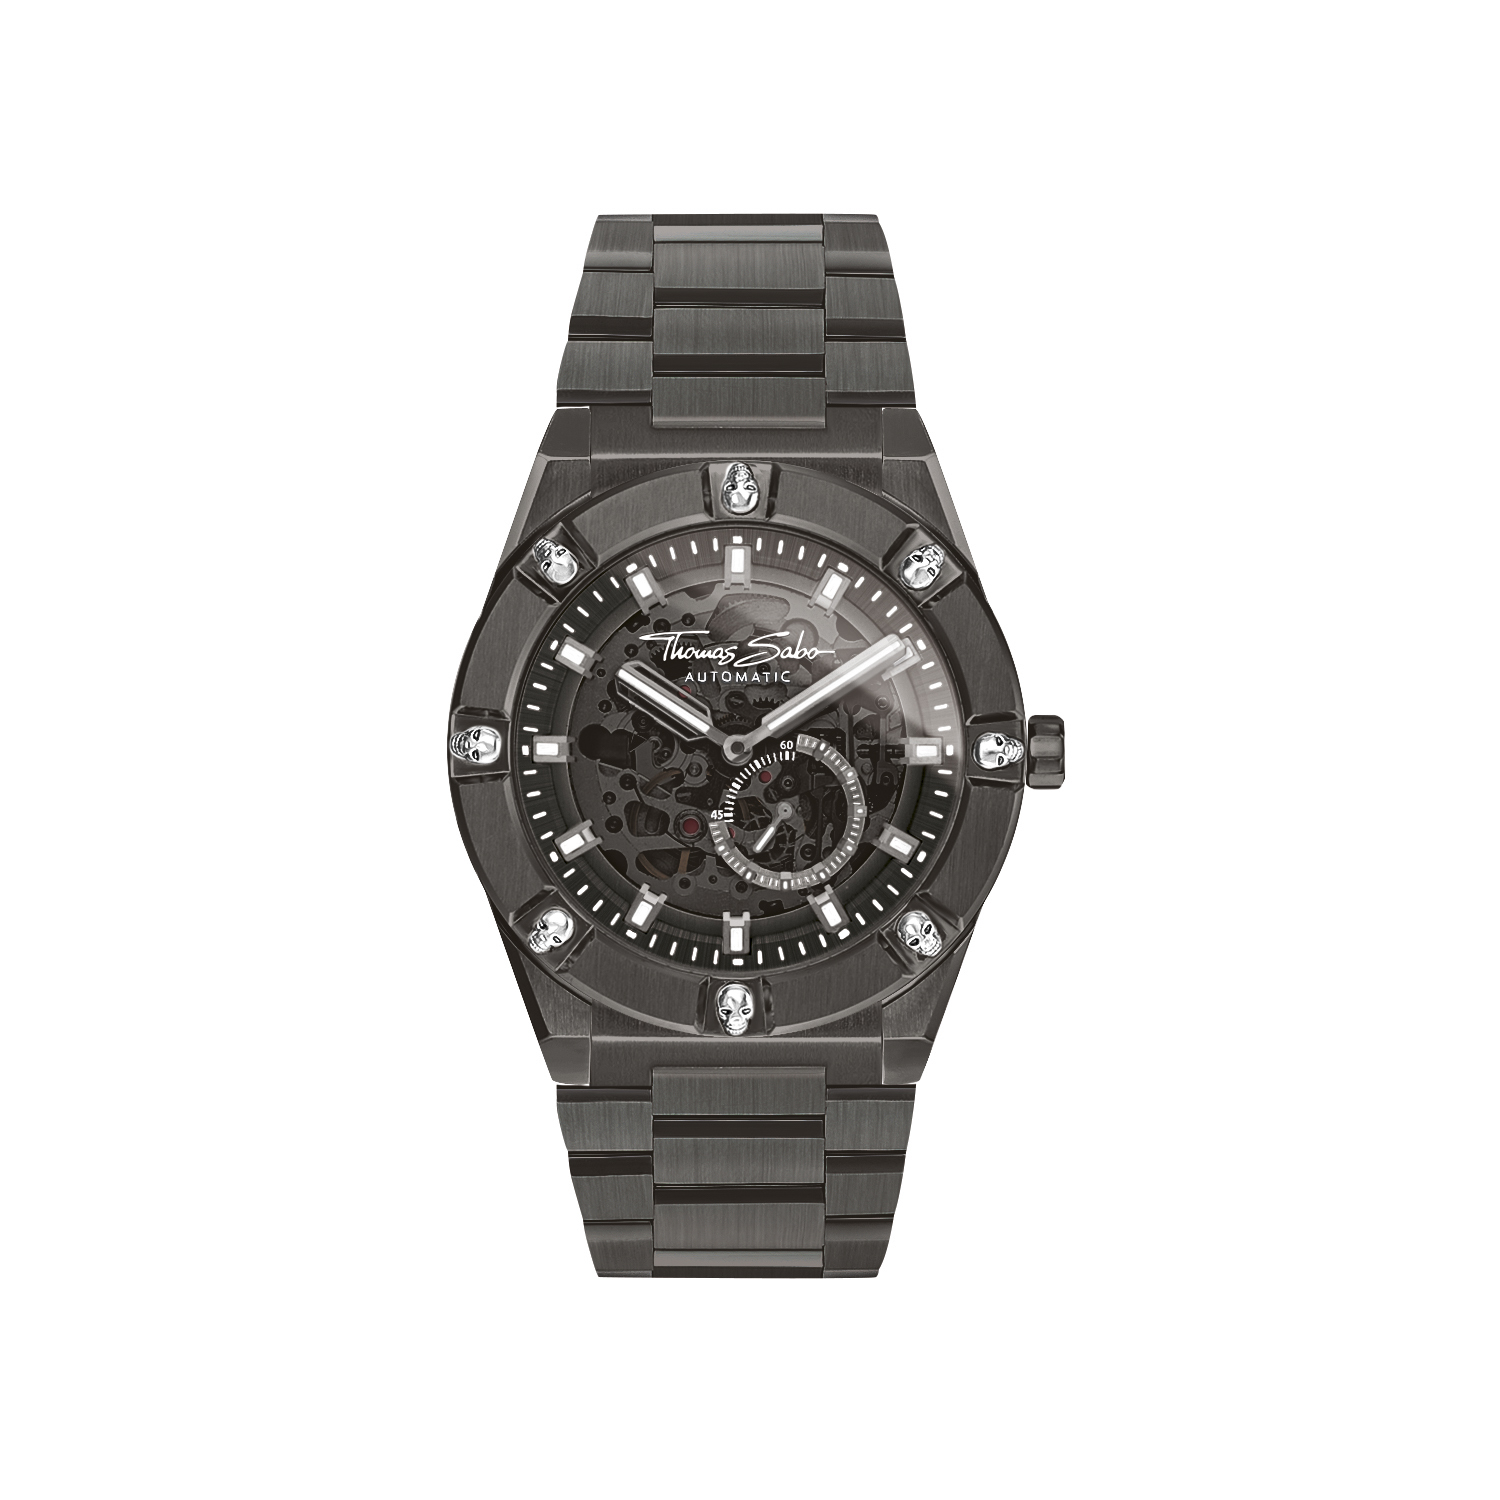 ICONIC WATCH SKELETONISED - Apparel